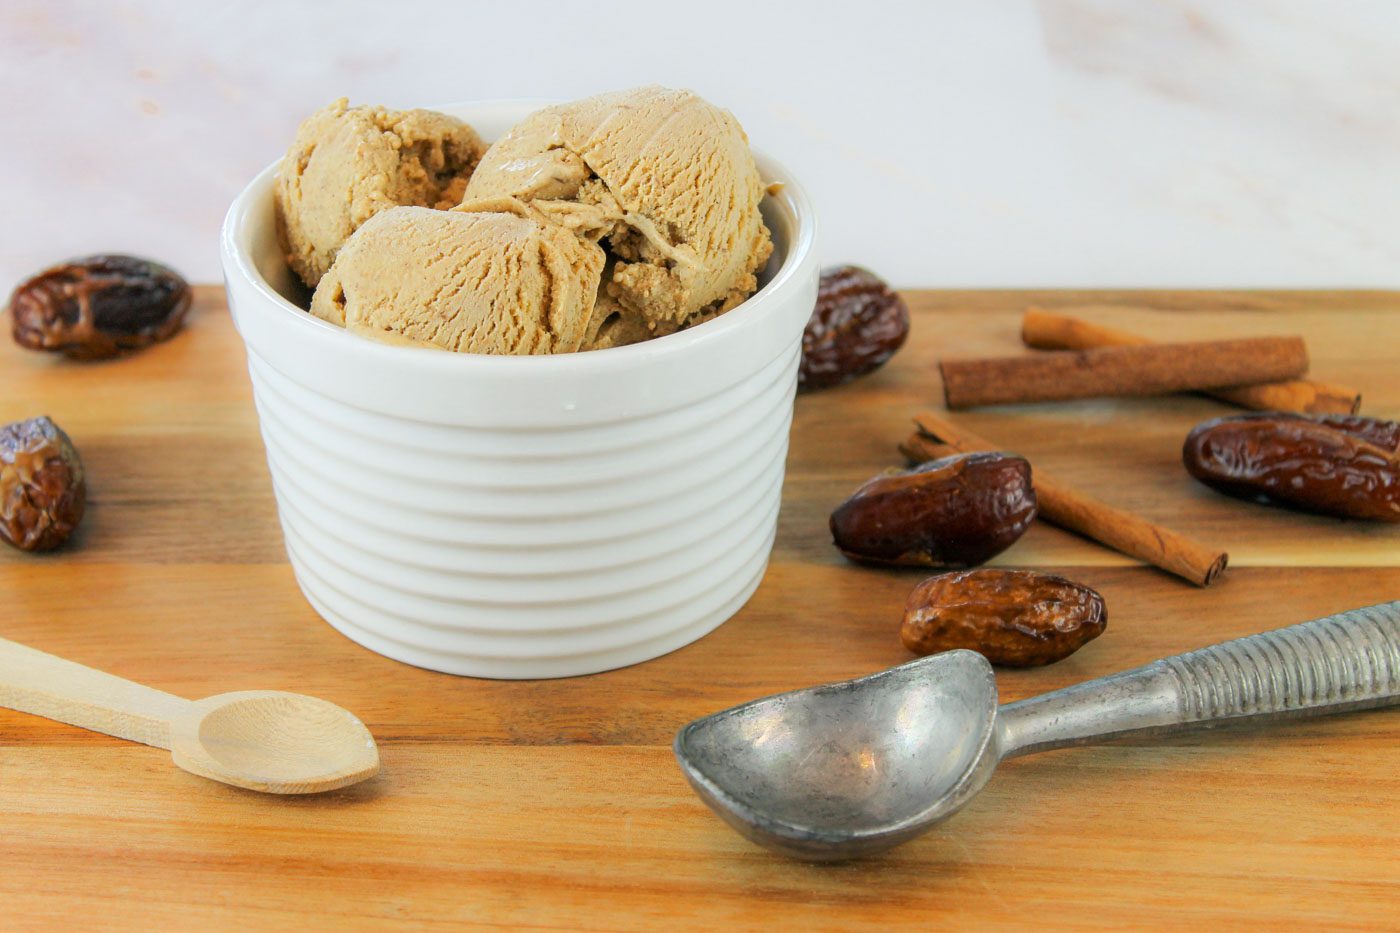 striped ceramic bowl full of ice cream sits surrounded by cinnamon sticks and dried dates